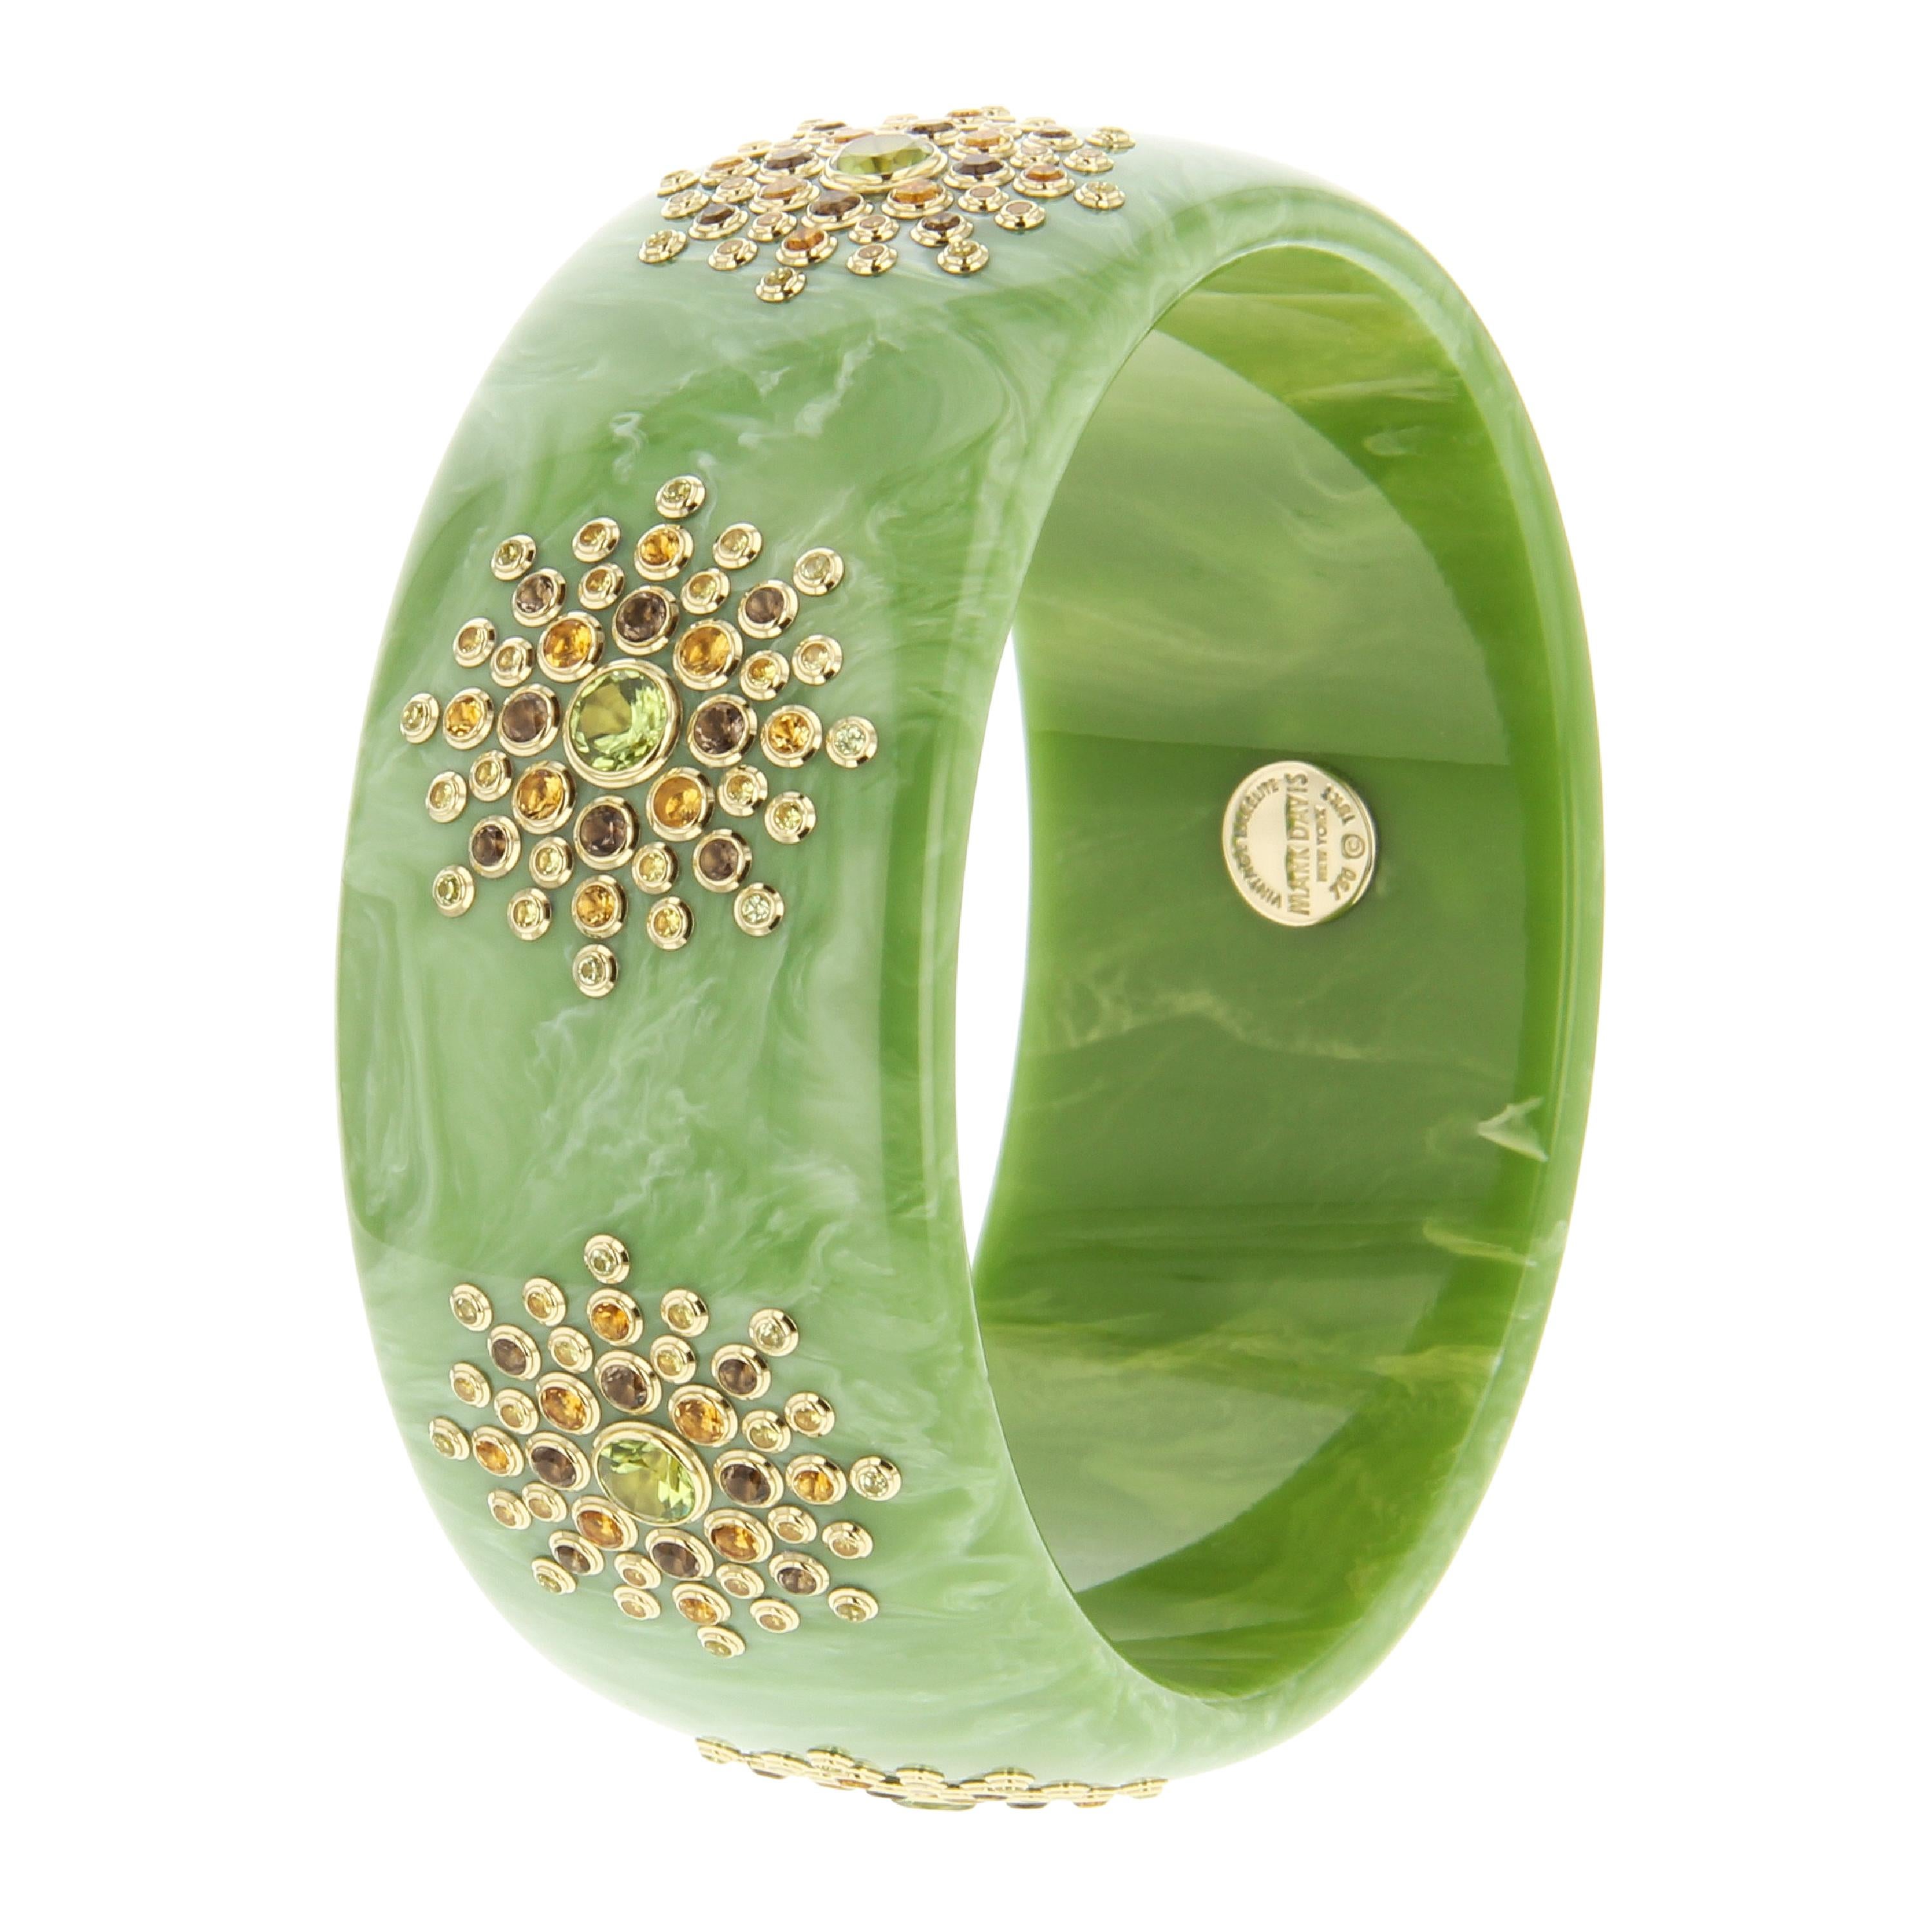 A lovely, soft, powdery green Mark Davis bangle of vintage bakelite. Set with seven stations of smoky quartz, citrine, peridot and yellow sapphire. A very pretty and feminine bangle that is charming without being saccharine sweet.

Full details